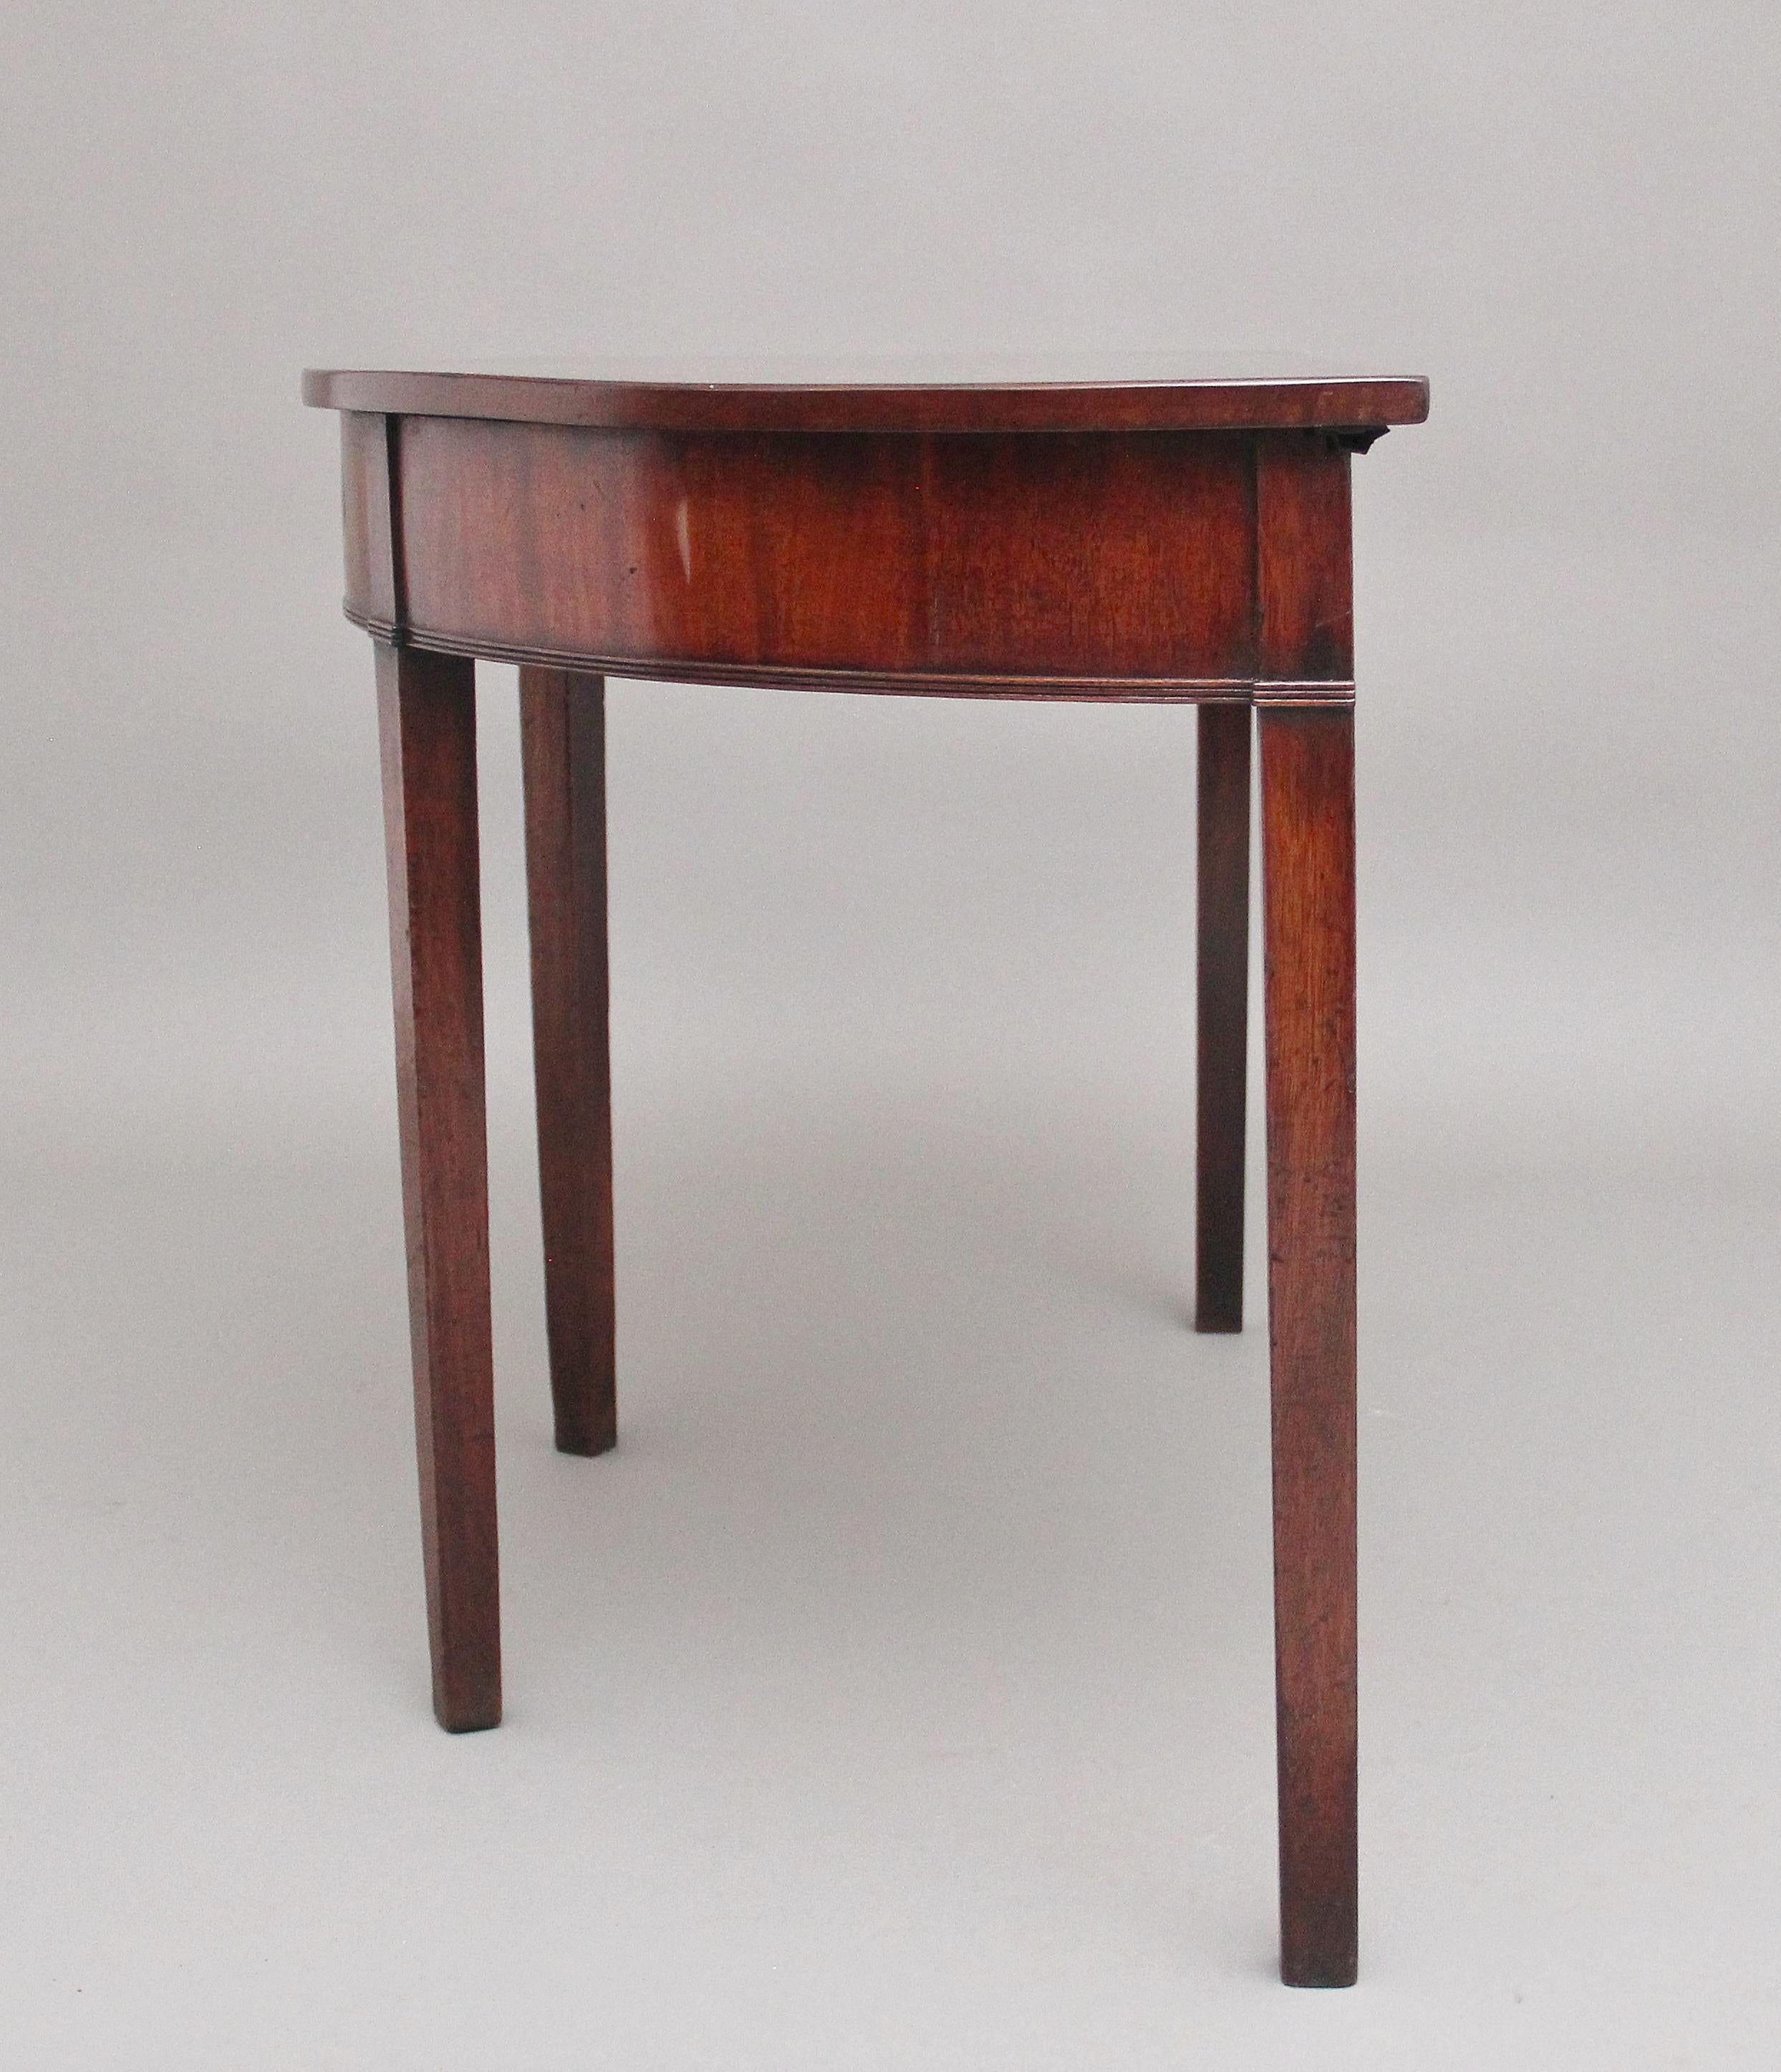 19th Century Mahogany Demilune Console Table In Good Condition For Sale In Martlesham, GB